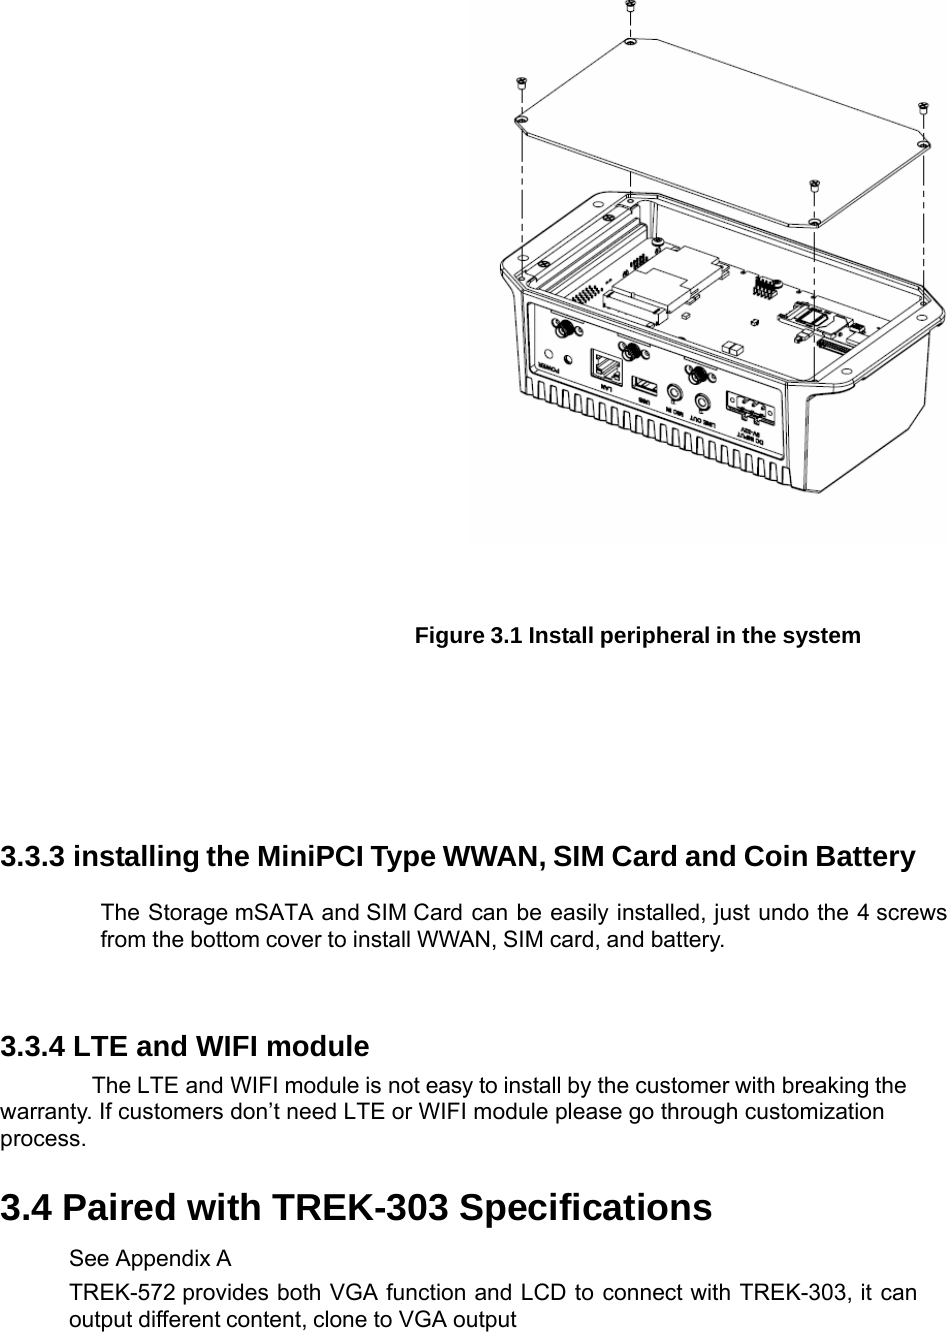     Figure 3.1 Install peripheral in the system 3.3.3 installing the MiniPCI Type WWAN, SIM Card and Coin BatteryThe Storage mSATA and SIM Card can be easily installed, just undo the 4 screws from the bottom cover to install WWAN, SIM card, and battery.   3.3.4 LTE and WIFI module The LTE and WIFI module is not easy to install by the customer with breaking the warranty. If customers don’t need LTE or WIFI module please go through customization process. 3.4 Paired with TREK-303 Specifications See Appendix A TREK-572 provides both VGA function and LCD to connect with TREK-303, it can output different content, clone to VGA output